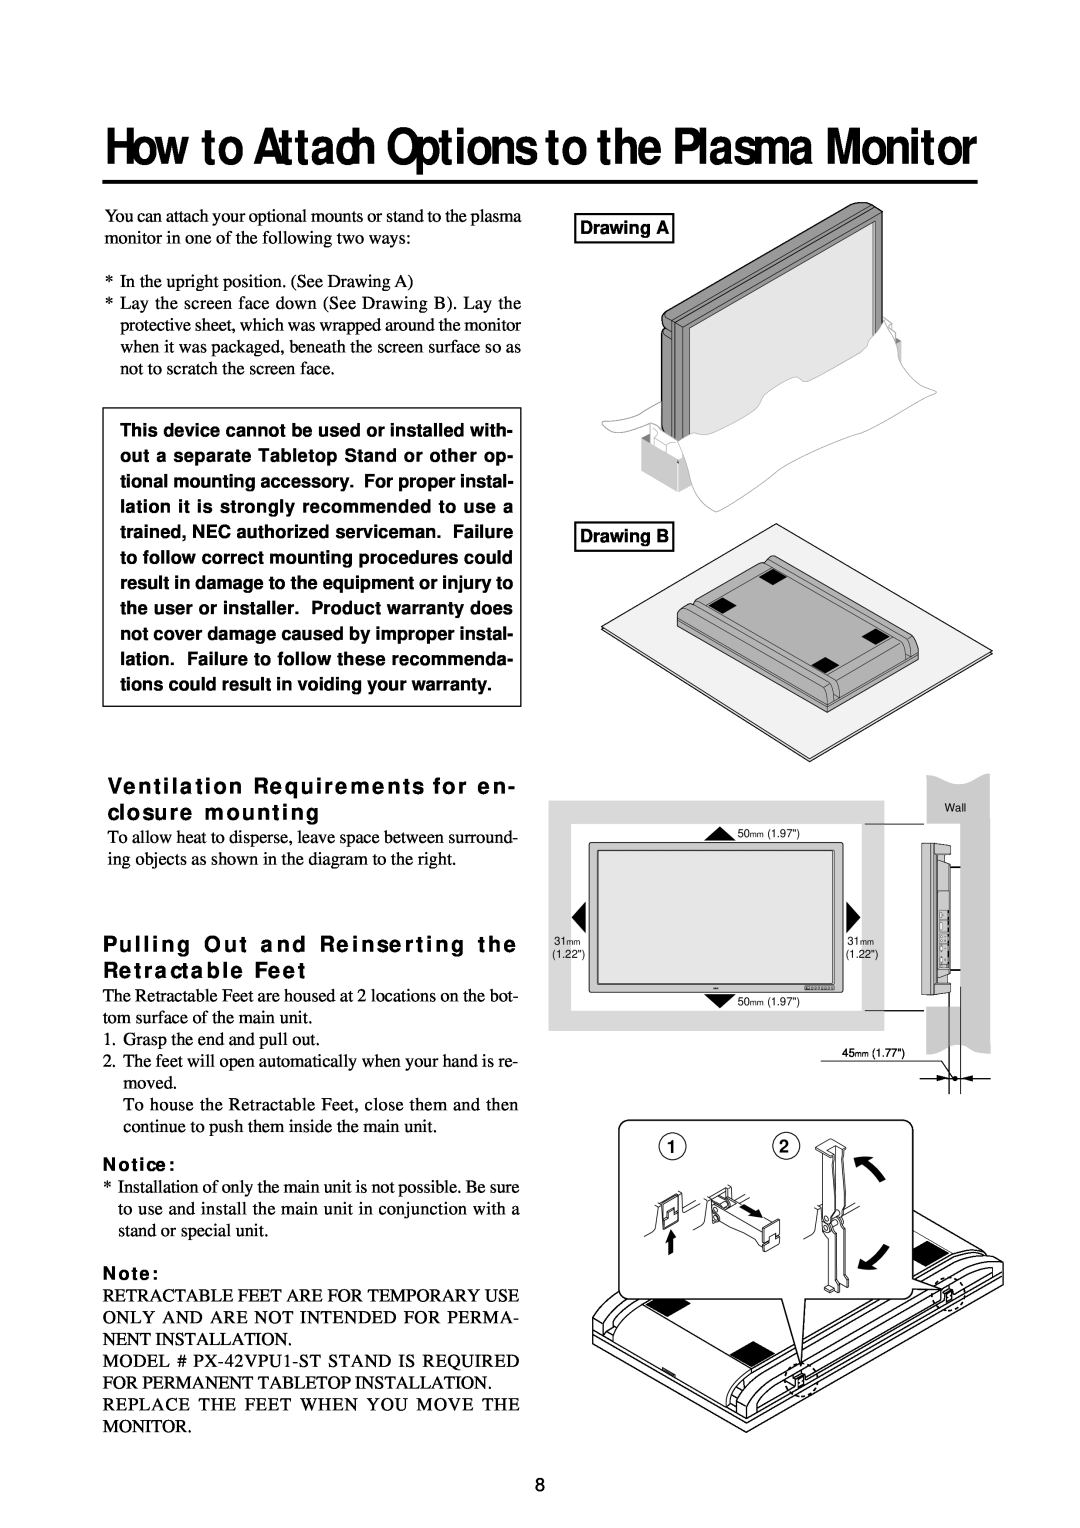 NEC 50PD1, 42PD2 Ventilation Requirements for en- closure mounting, Pulling Out and Reinserting the Retractable Feet 